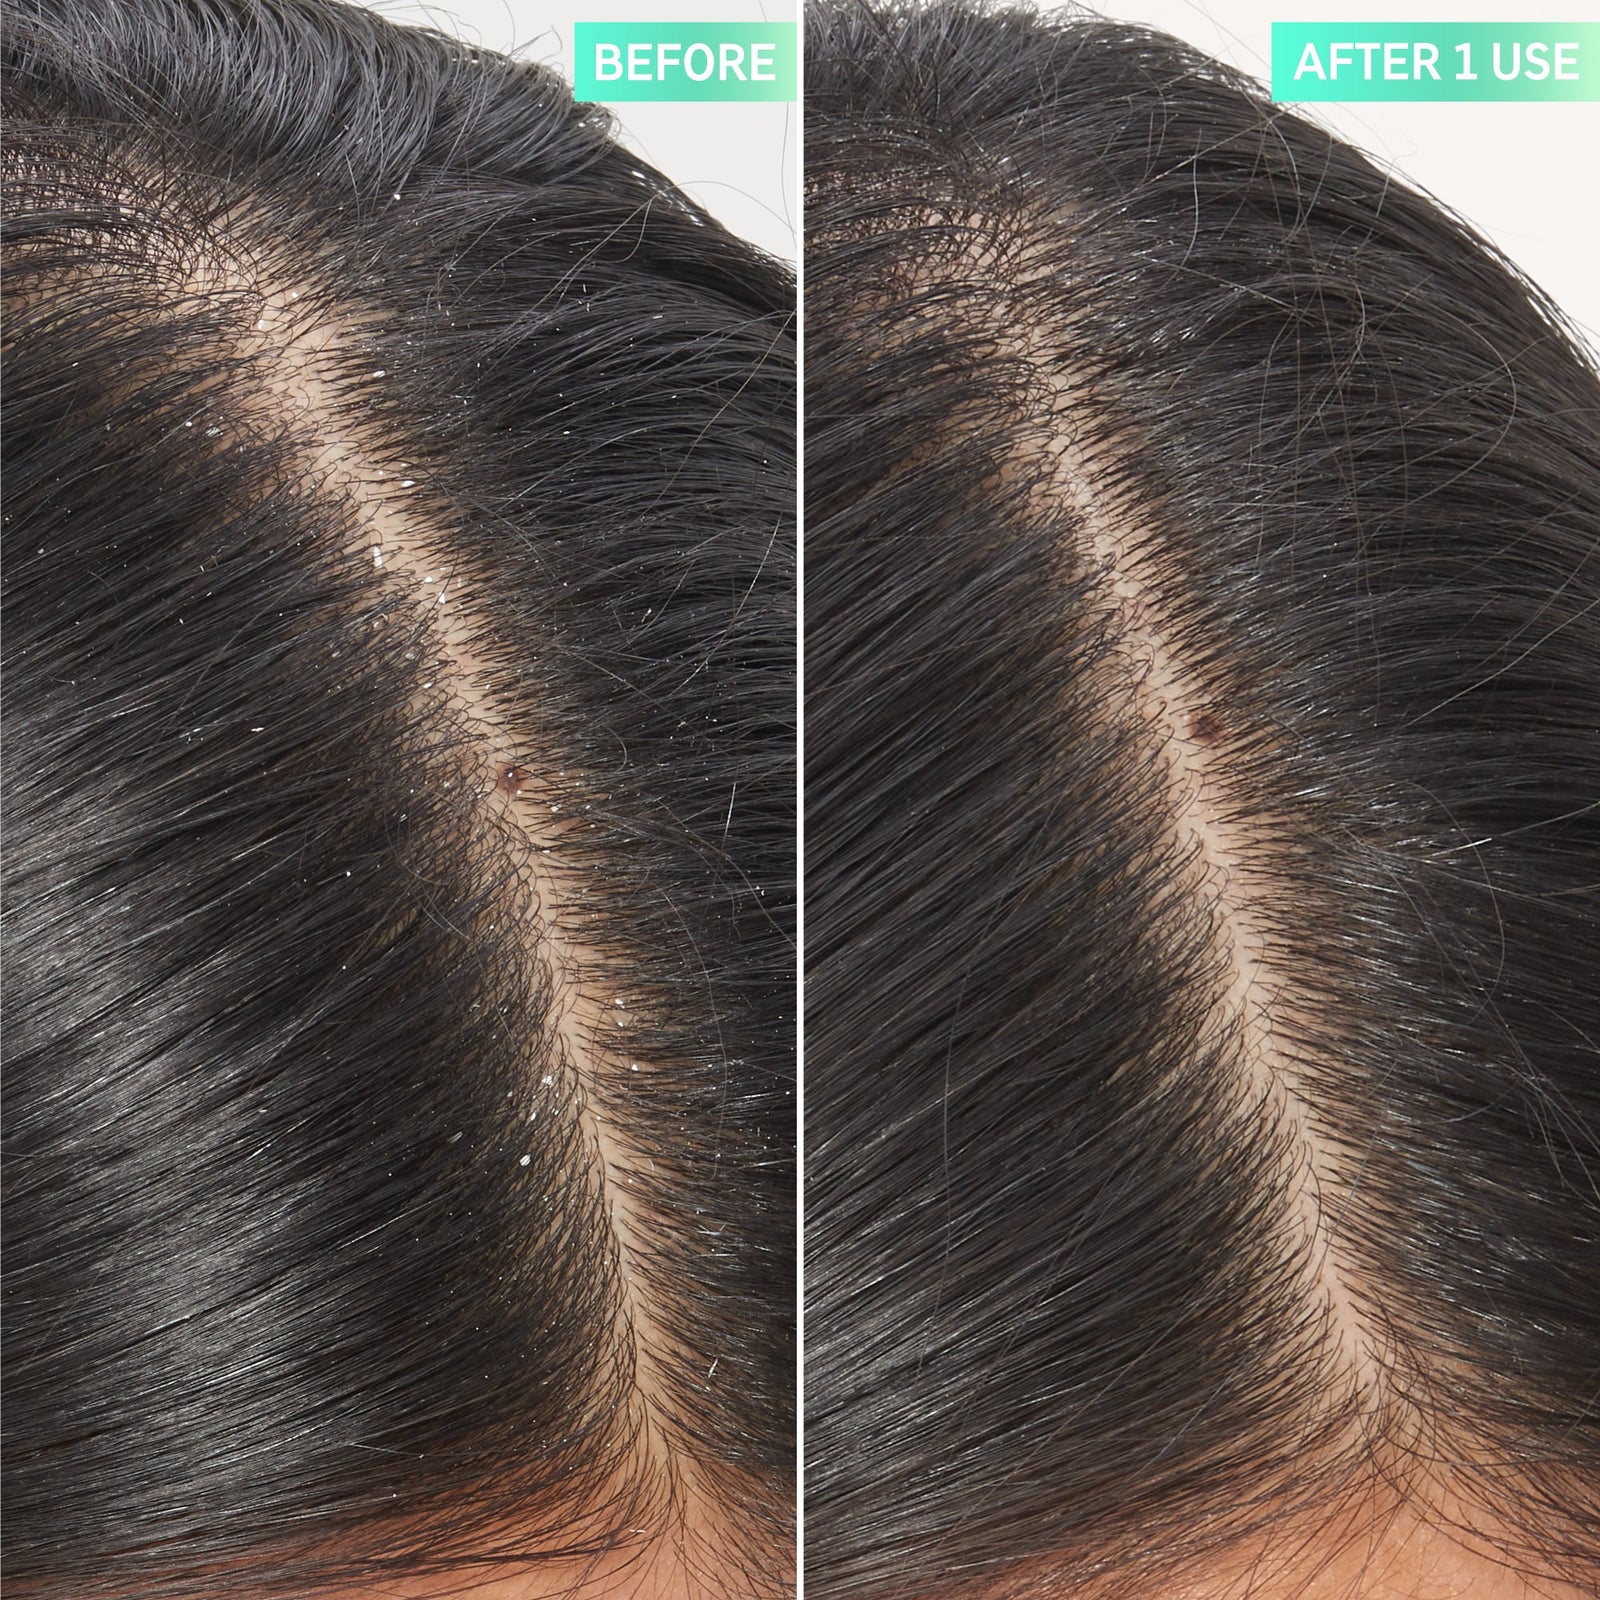 2 images of a scalp showing before and after using Salicylic Acid Exfoliating Scalp Treatment